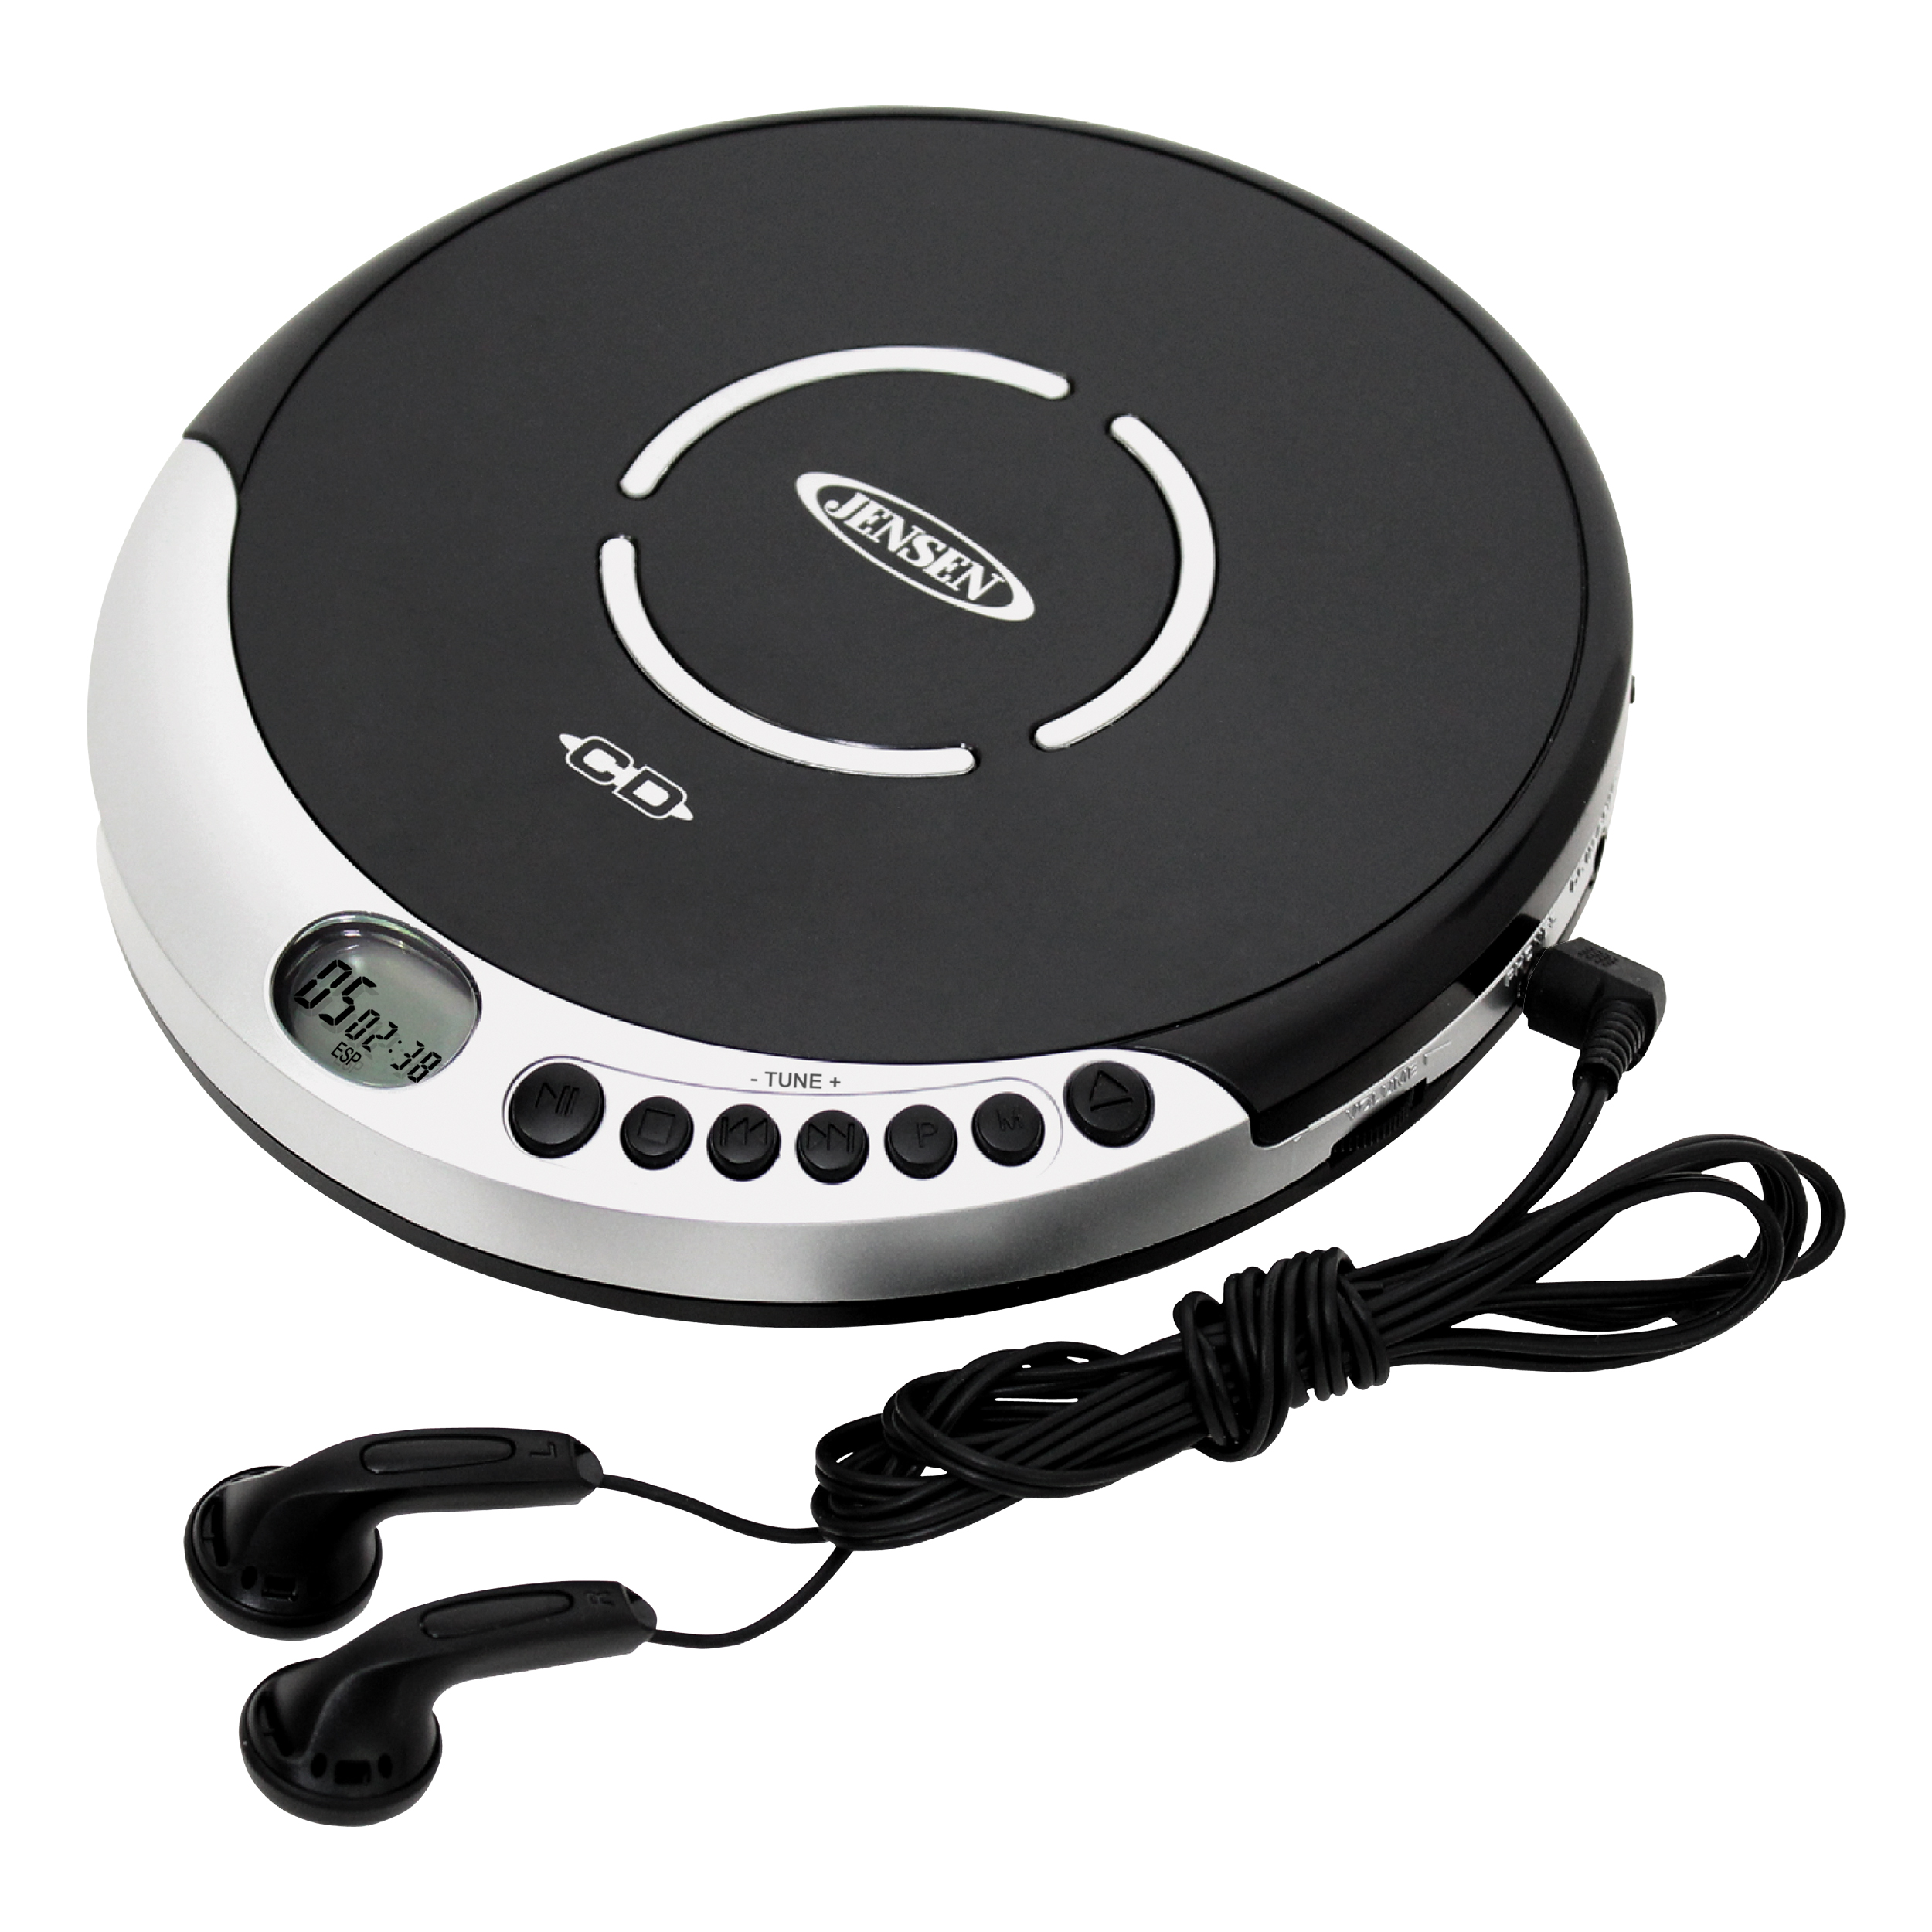 Jensen CD-60R Portable CD Player with Bass Boost - image 1 of 3